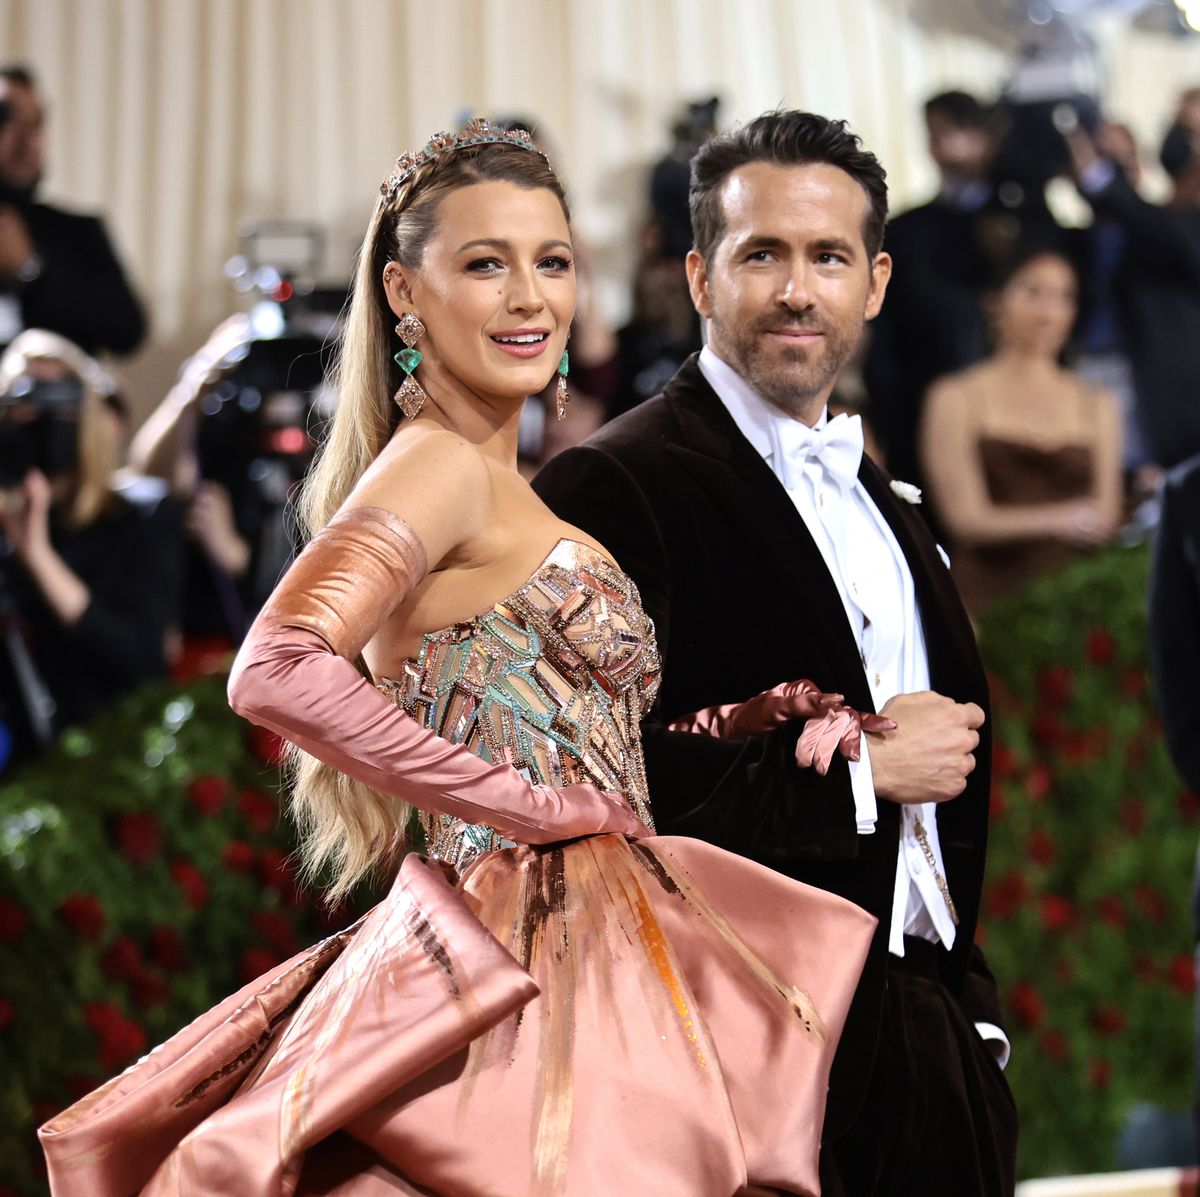 Blake Lively Shares Her First Time Out Without Her Kids